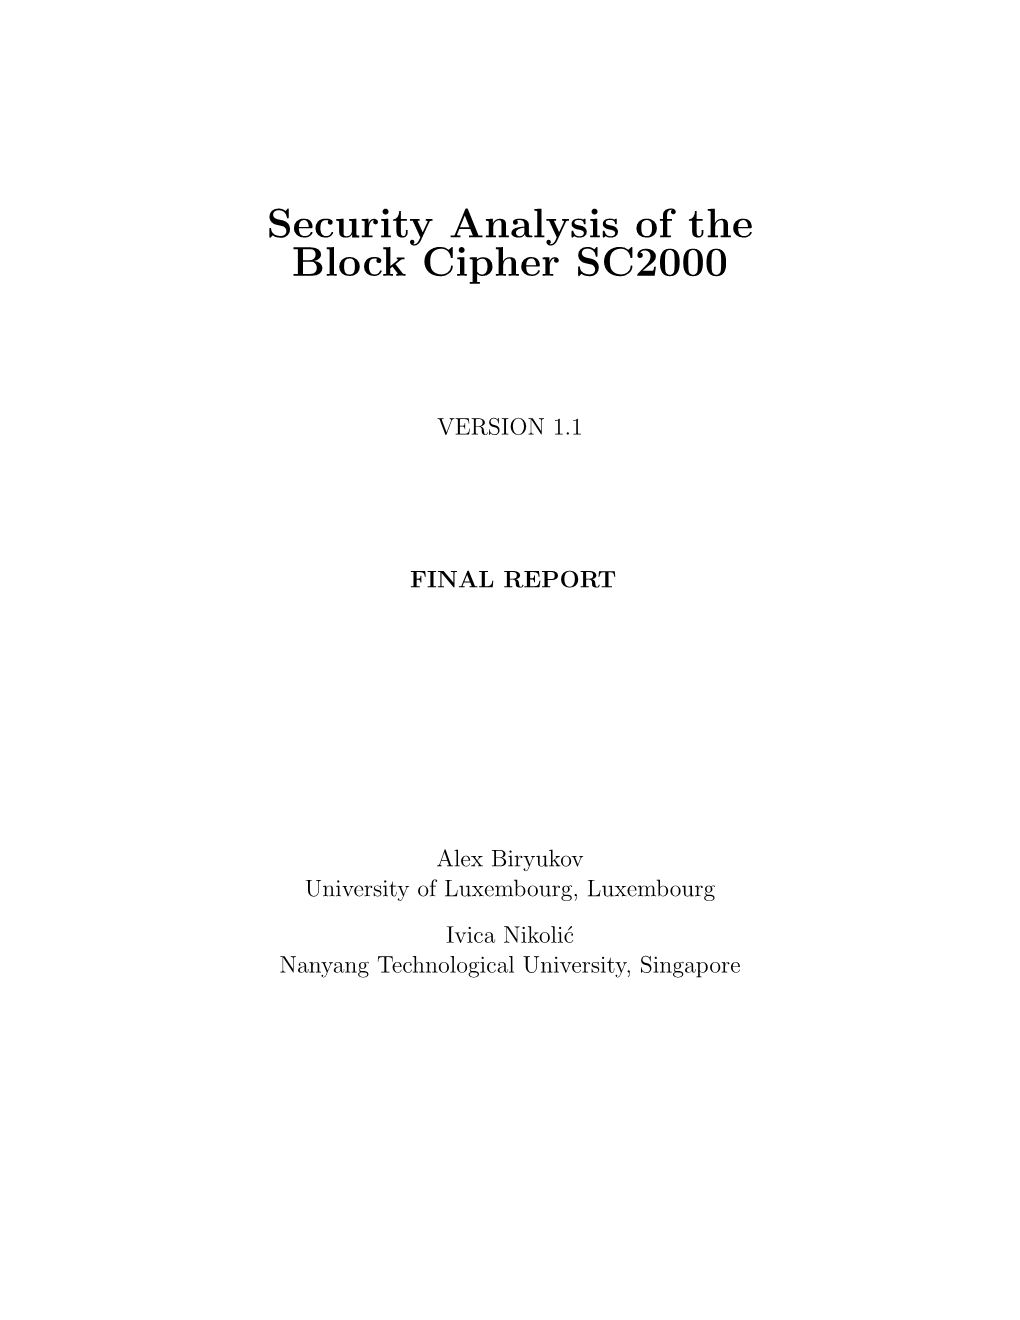 Security Analysis of the Block Cipher SC2000